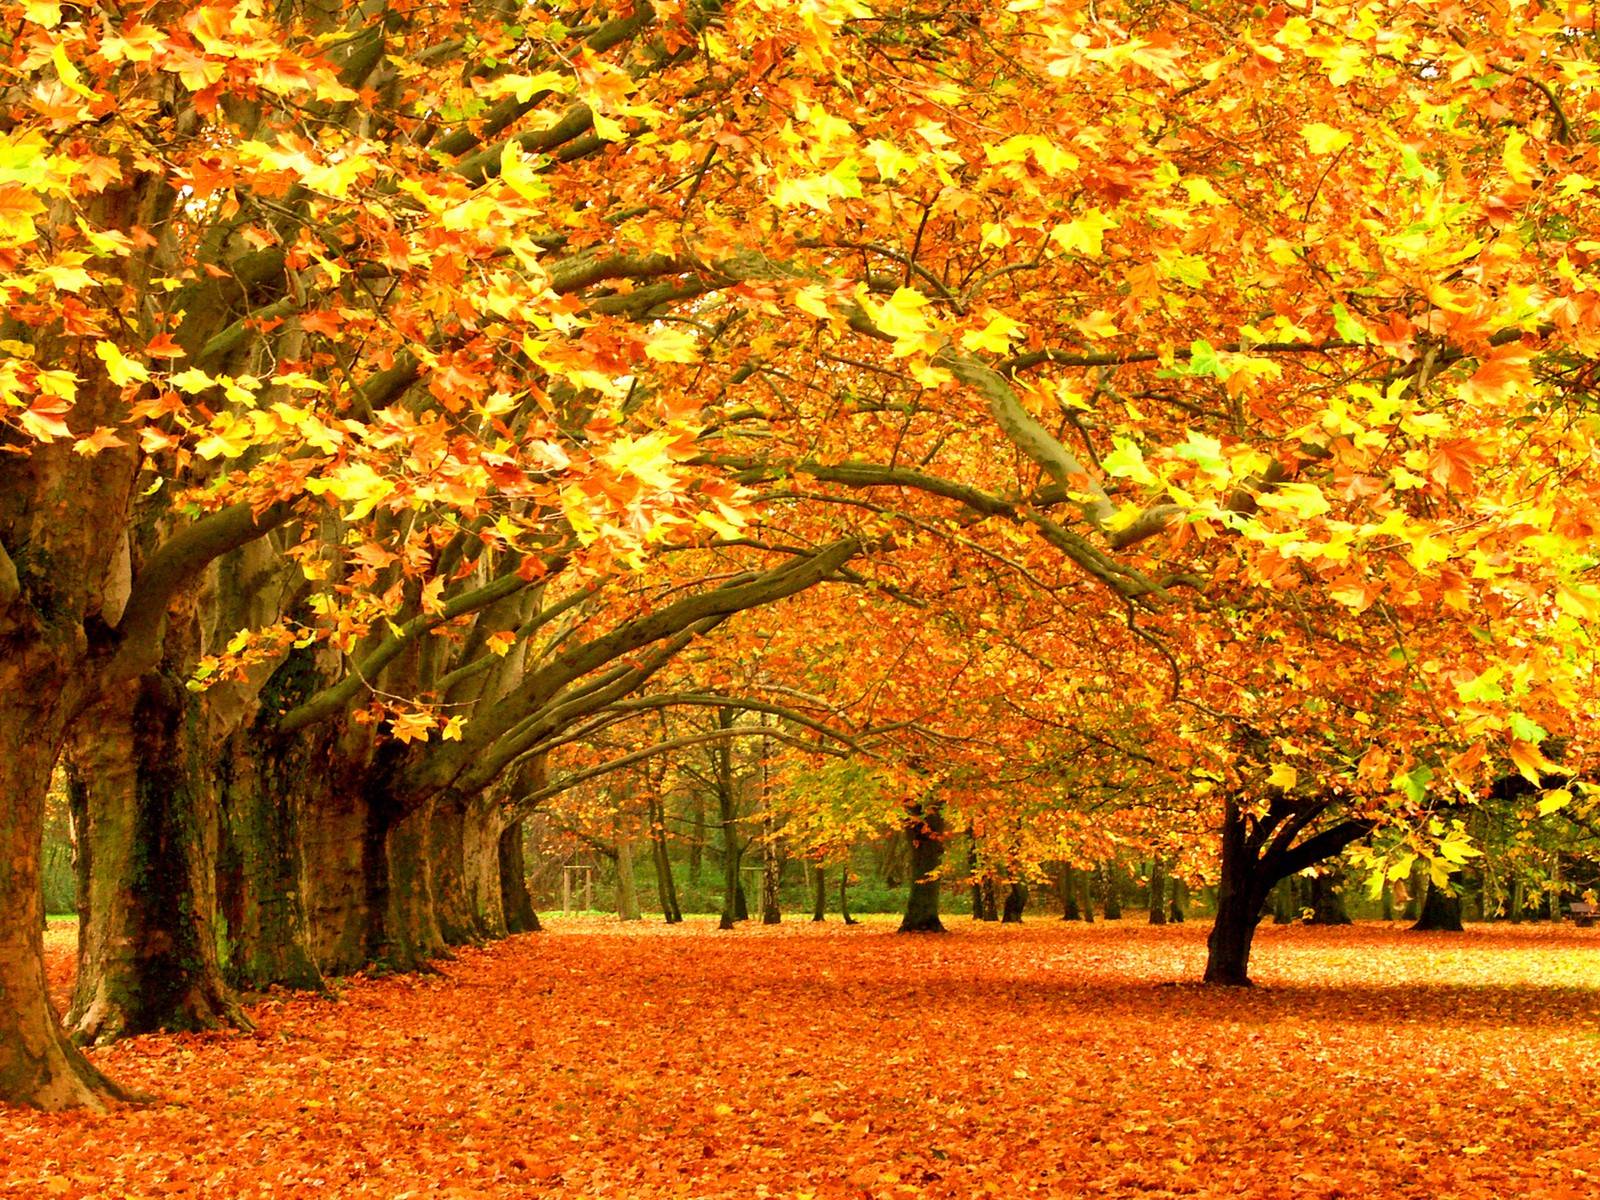 Hd Wallpaper Nature Fall Picture 5 HD Wallpaper. Hdimges